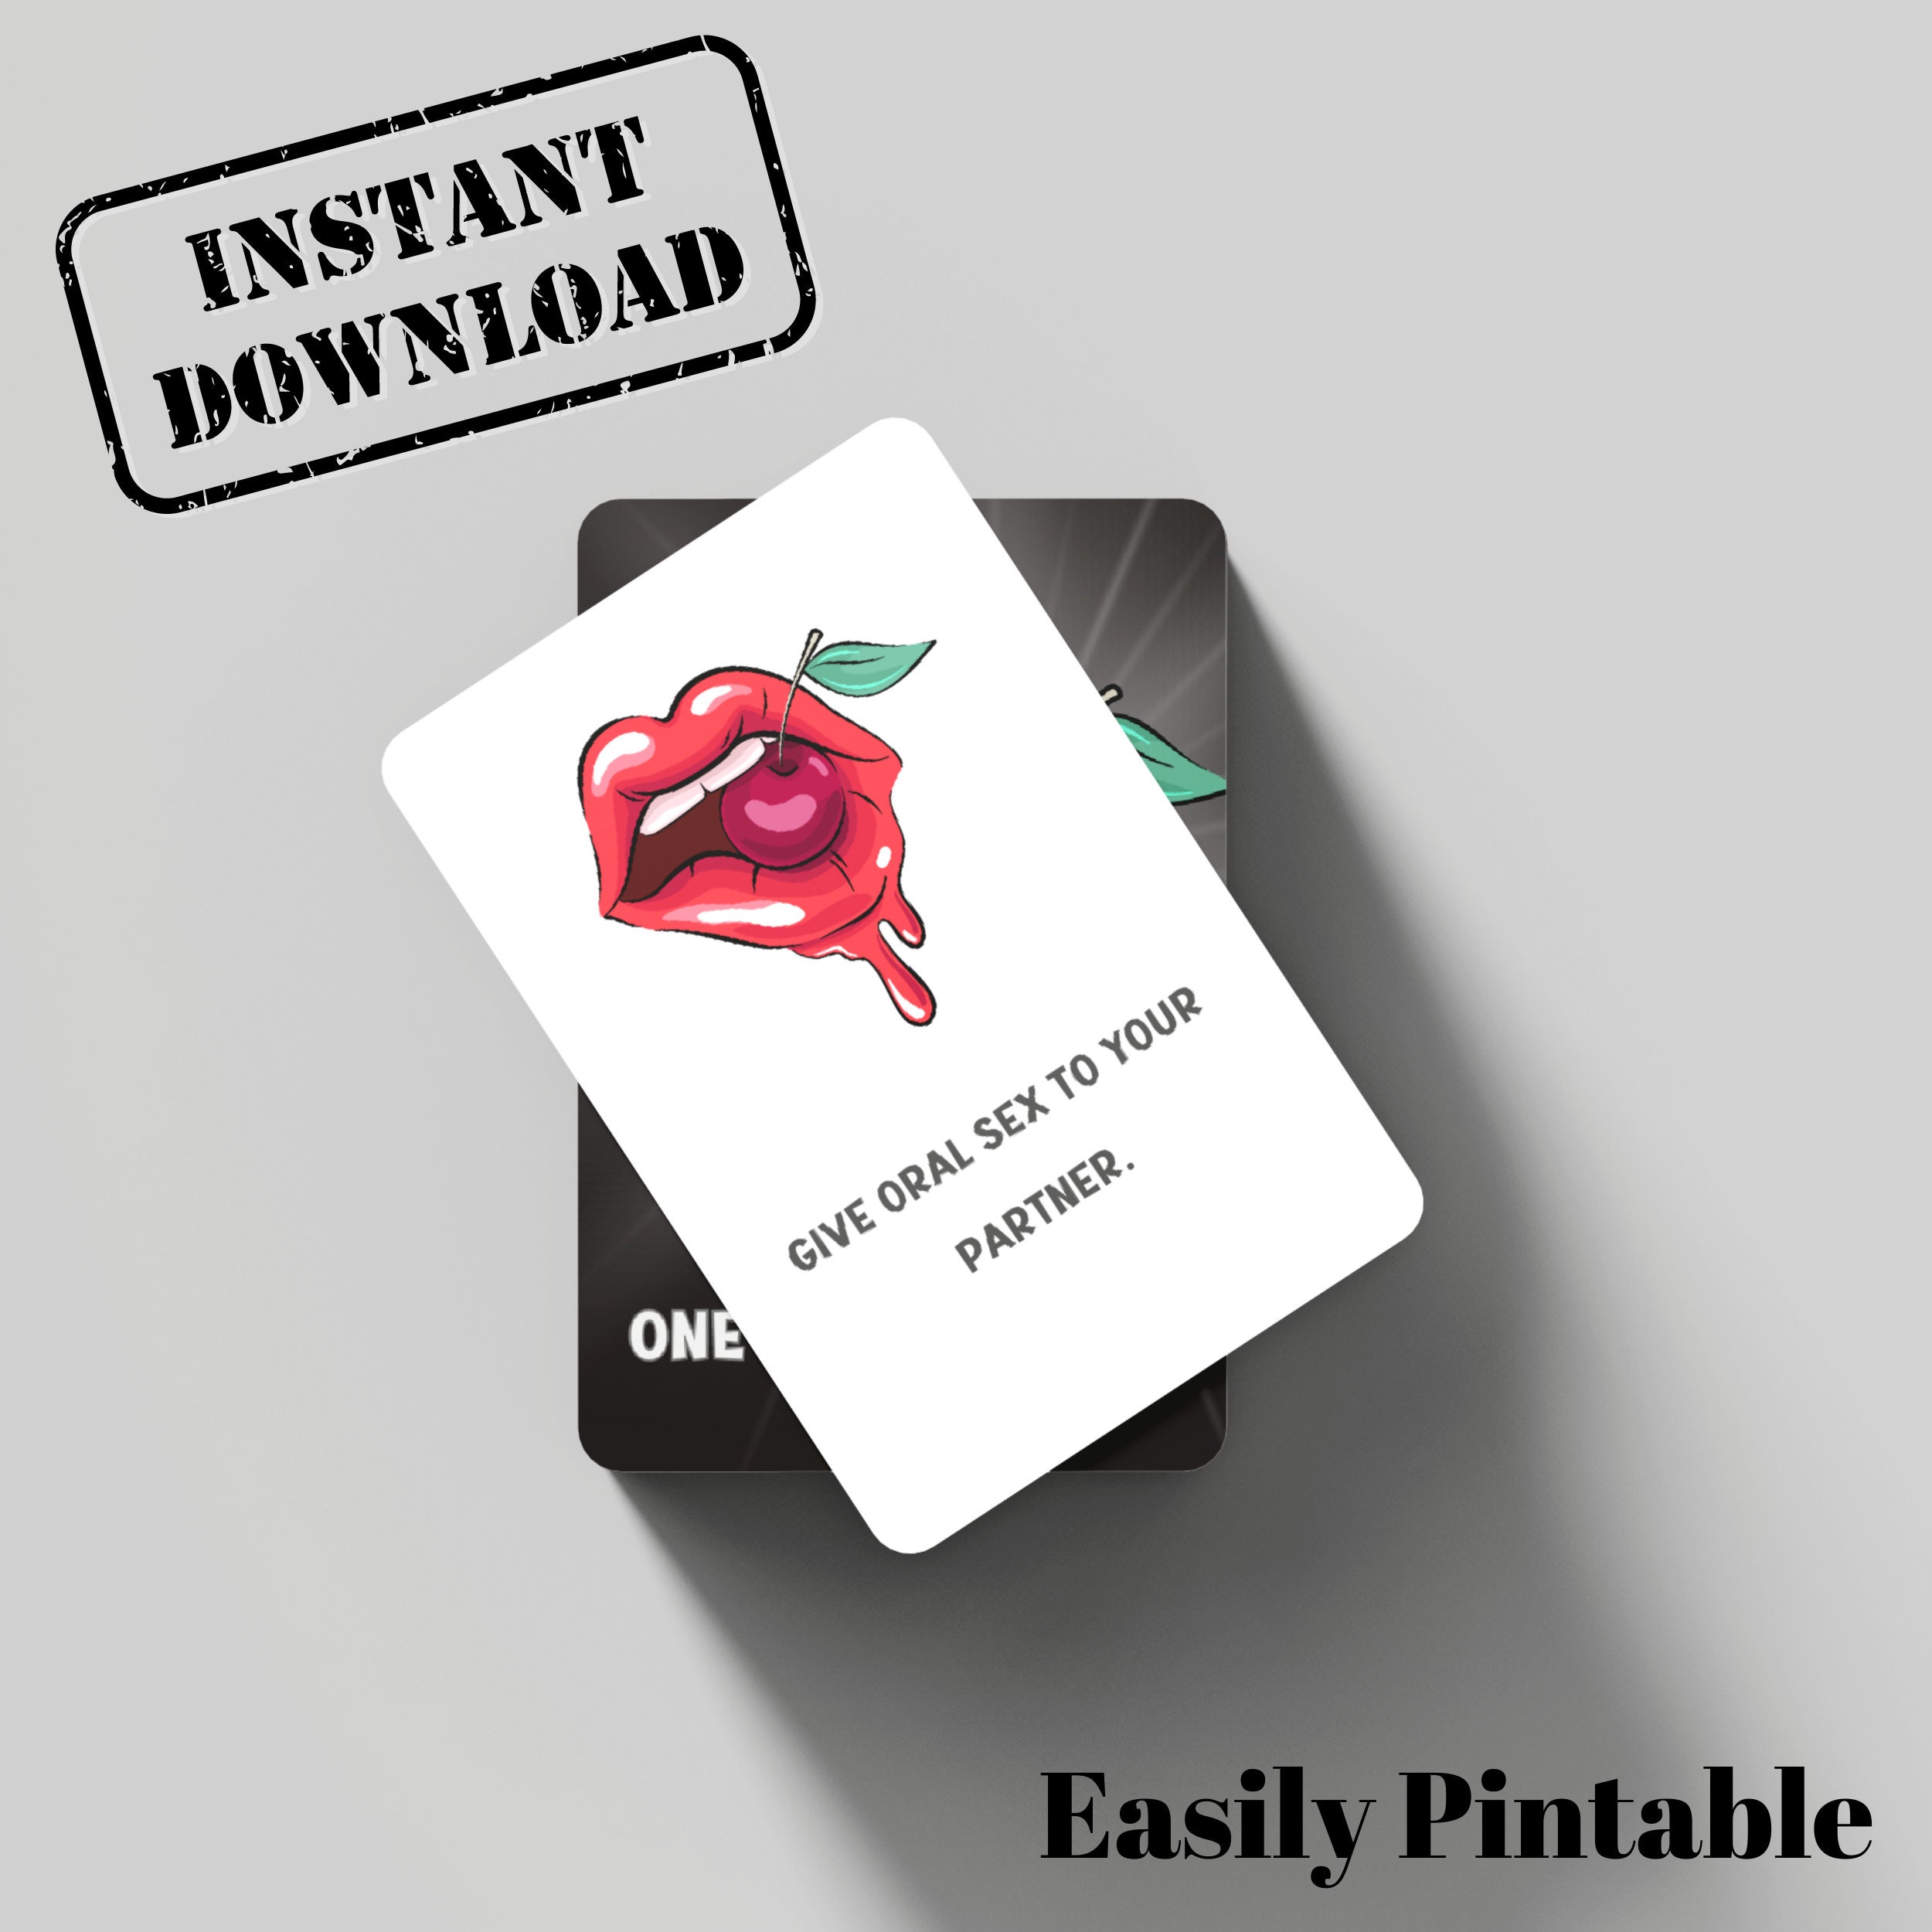  Oh Happy Games - Orgazmo - Spice up Your Intimate Life - The  Ultimate Card Game for Couples to Connect Emotionally and intimately -  Couple Games, Date Night Ideas, Couples Gifts 